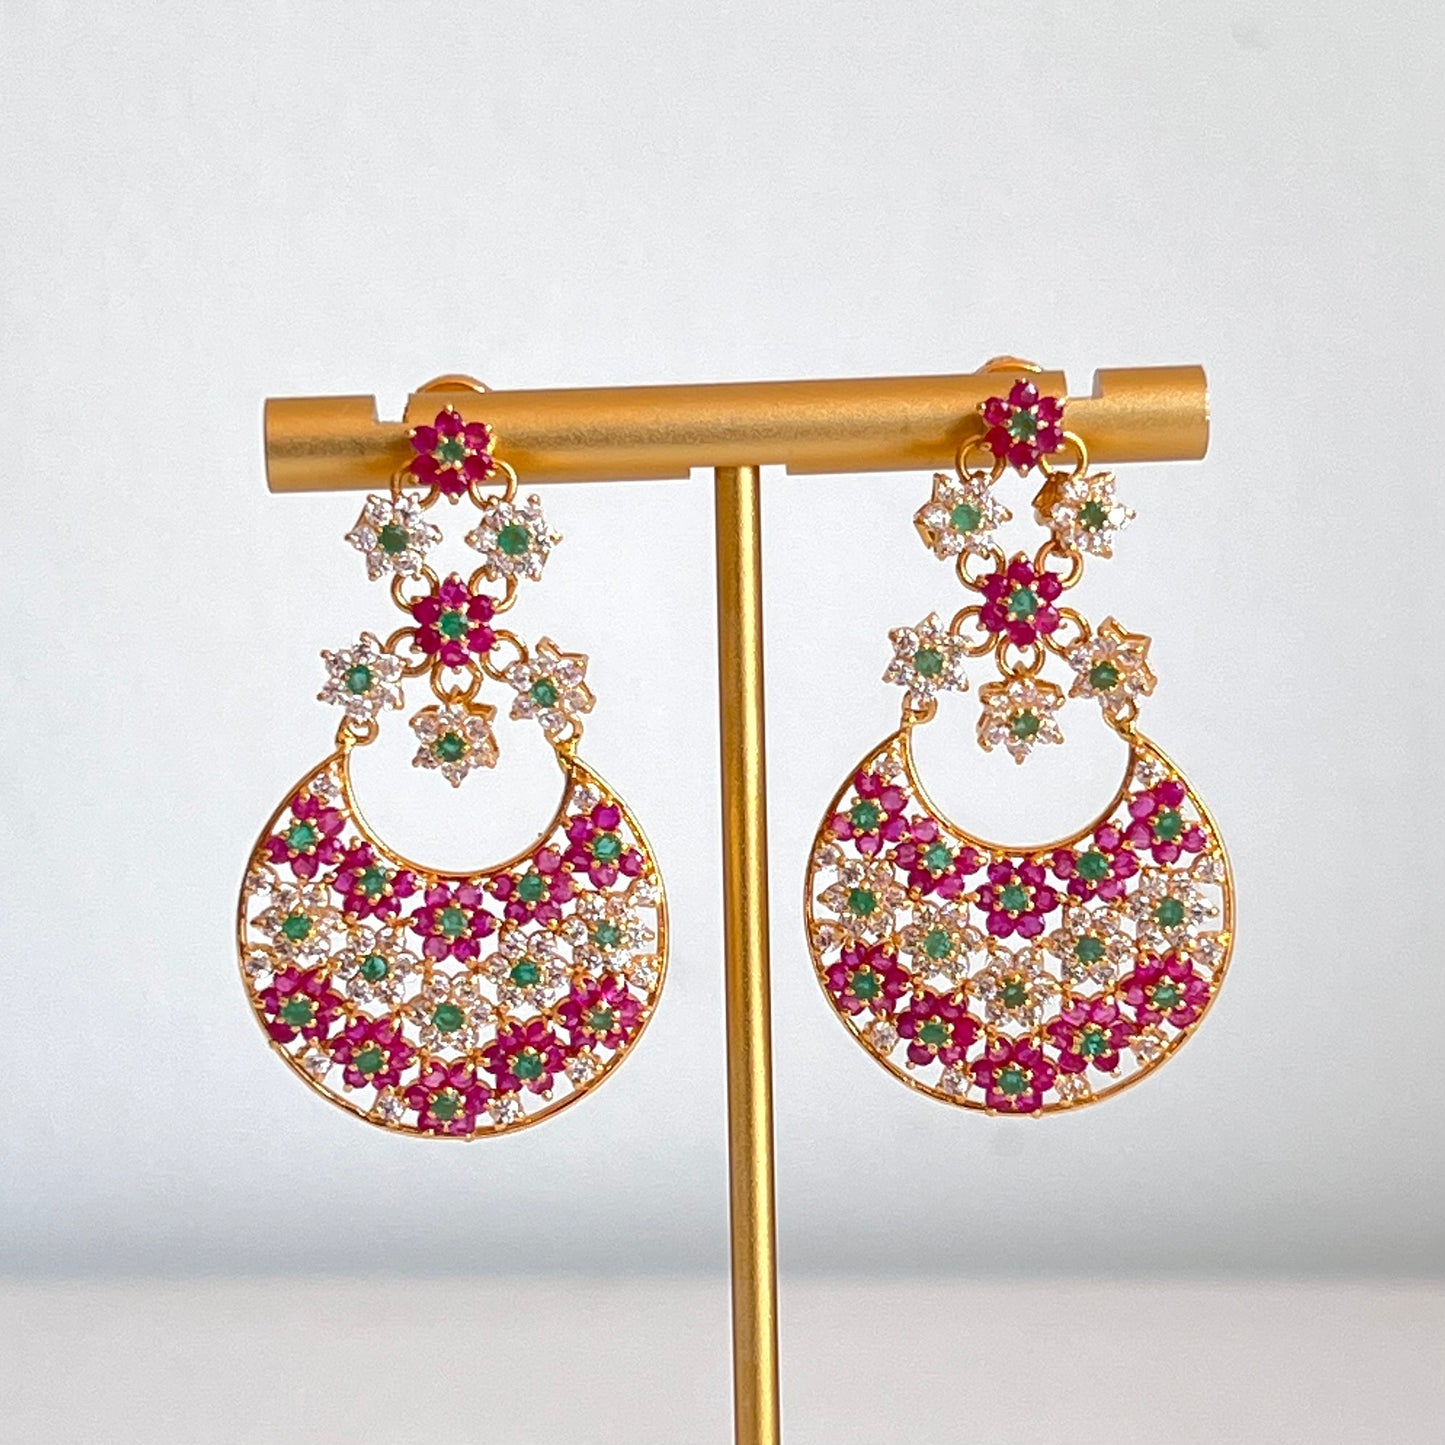 Illustrious Ruby & Emerald Earrings with Glistening Cubic Zarconia